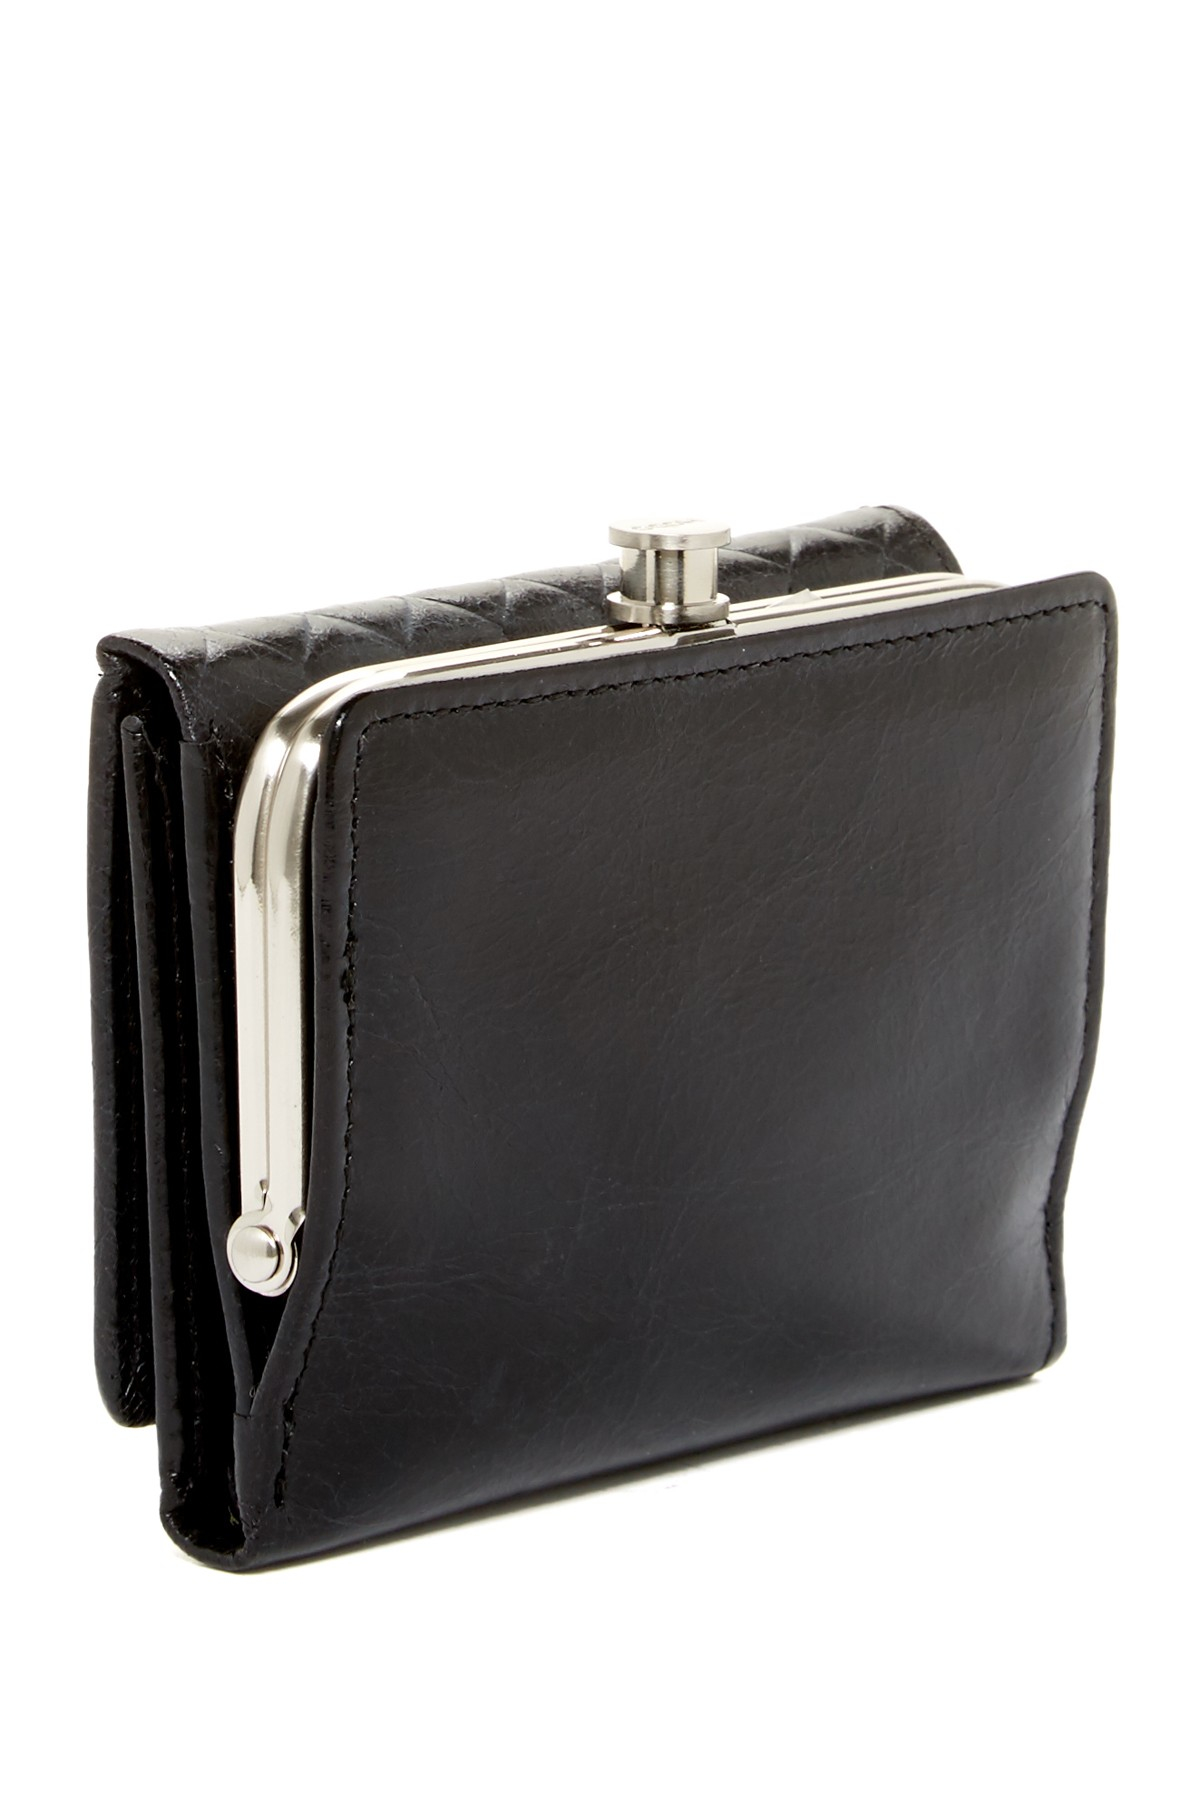 Lyst - Hobo Jannet Leather Trifold Coin Case Wallet in Black